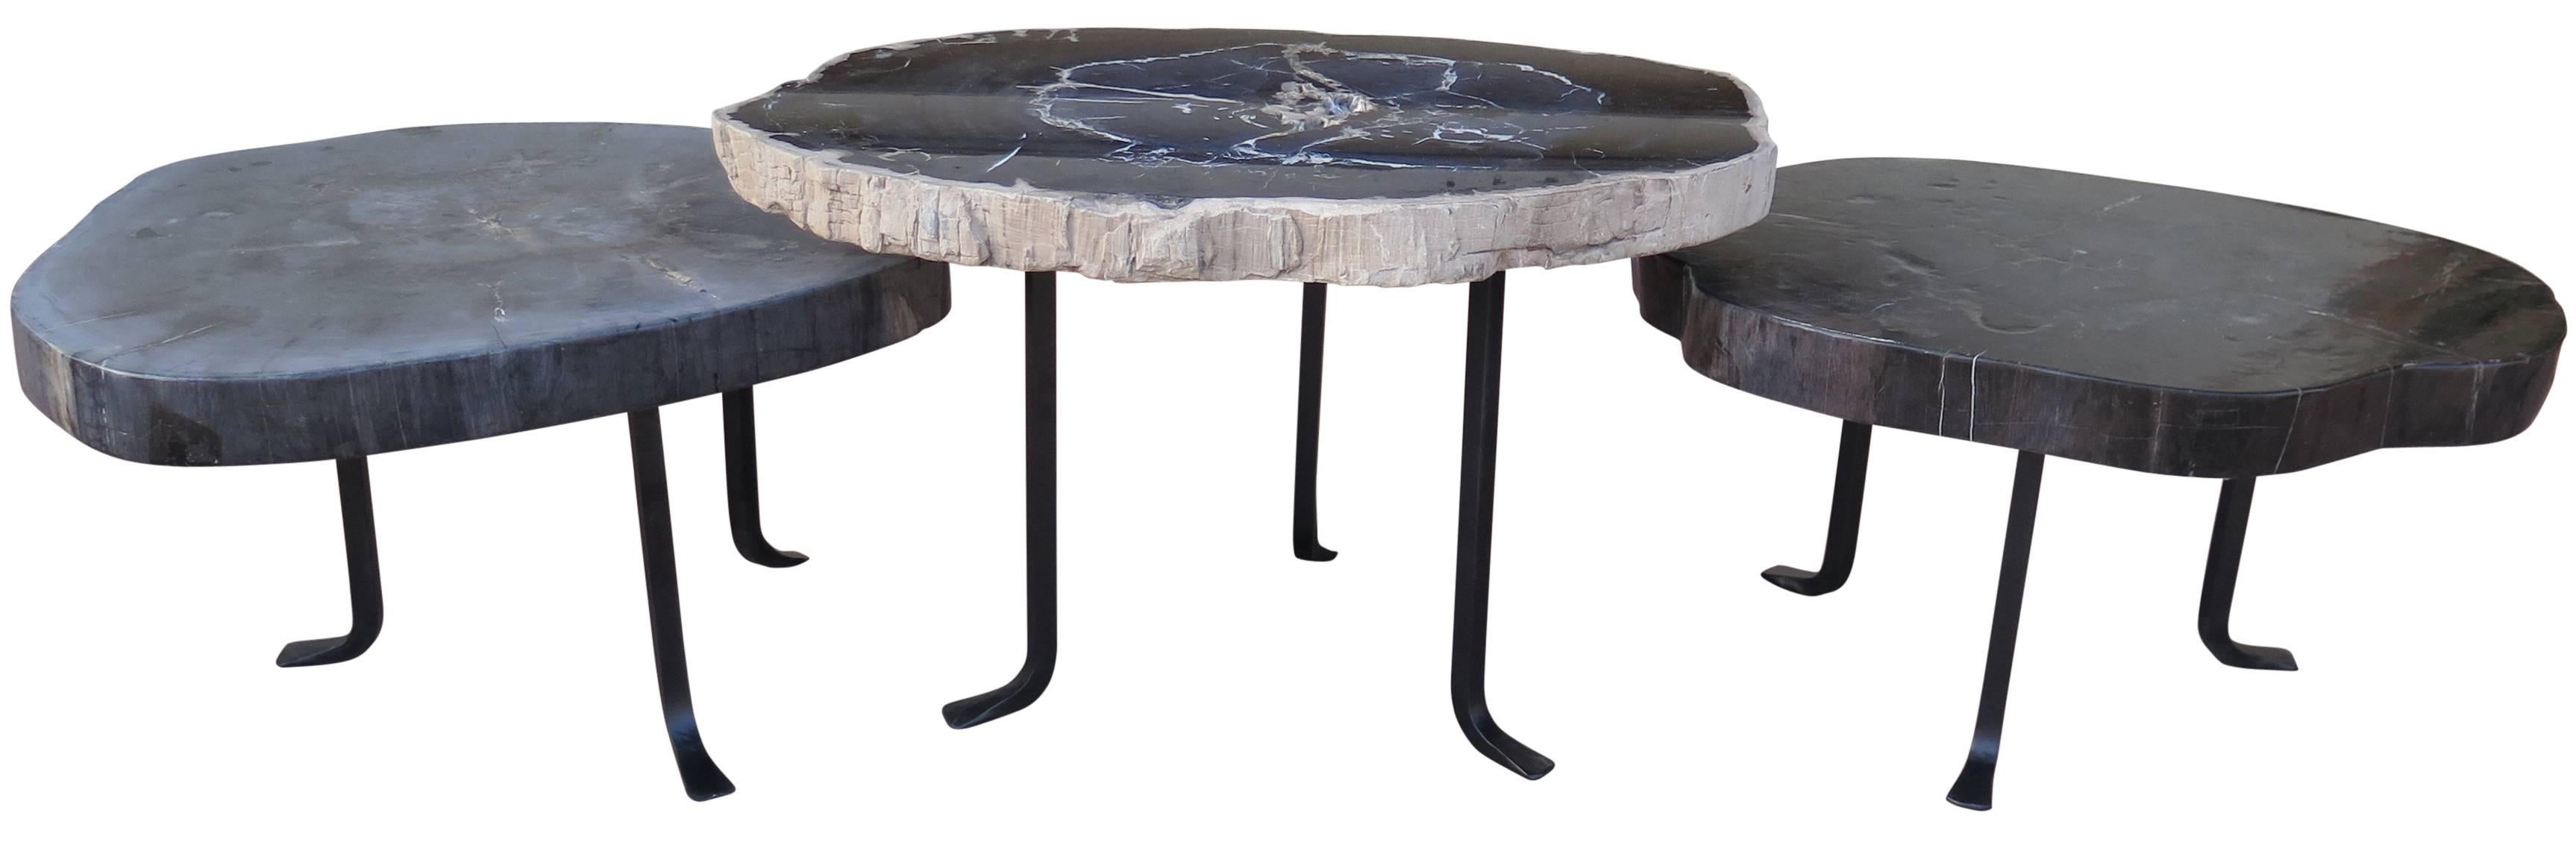 Steel bases hold this grouping of stunning petrified wood slab nesting tables. They are on different levels creating an interesting affect. The individual slabs are all 27-30" wide and 21-23" deep.They come in beautiful gray, white and